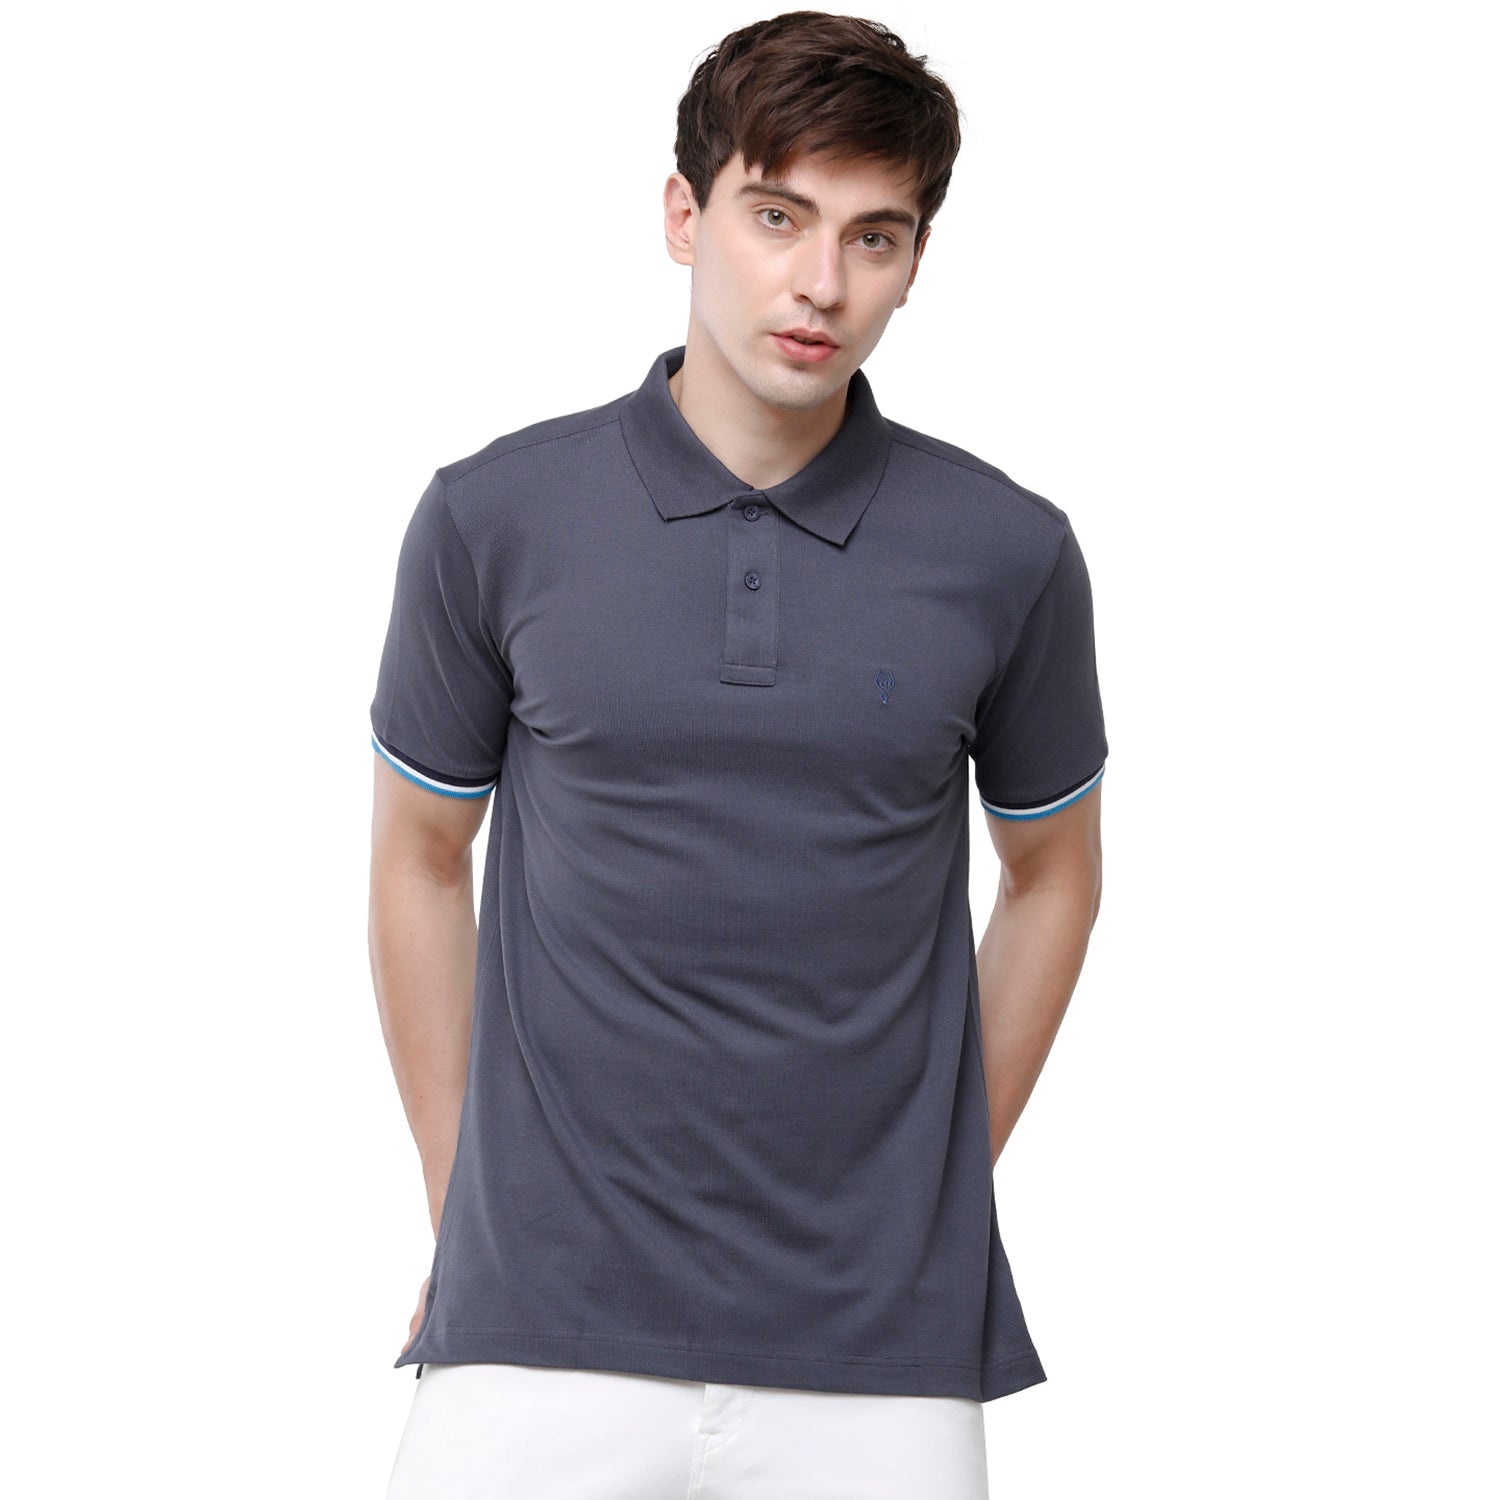 Classic polo Men's Grey Lycra Cotton Stretch Polo Half Sleeve Slim Fit T-Shirt - Tarte Indian Ink T-shirt Classic Polo 